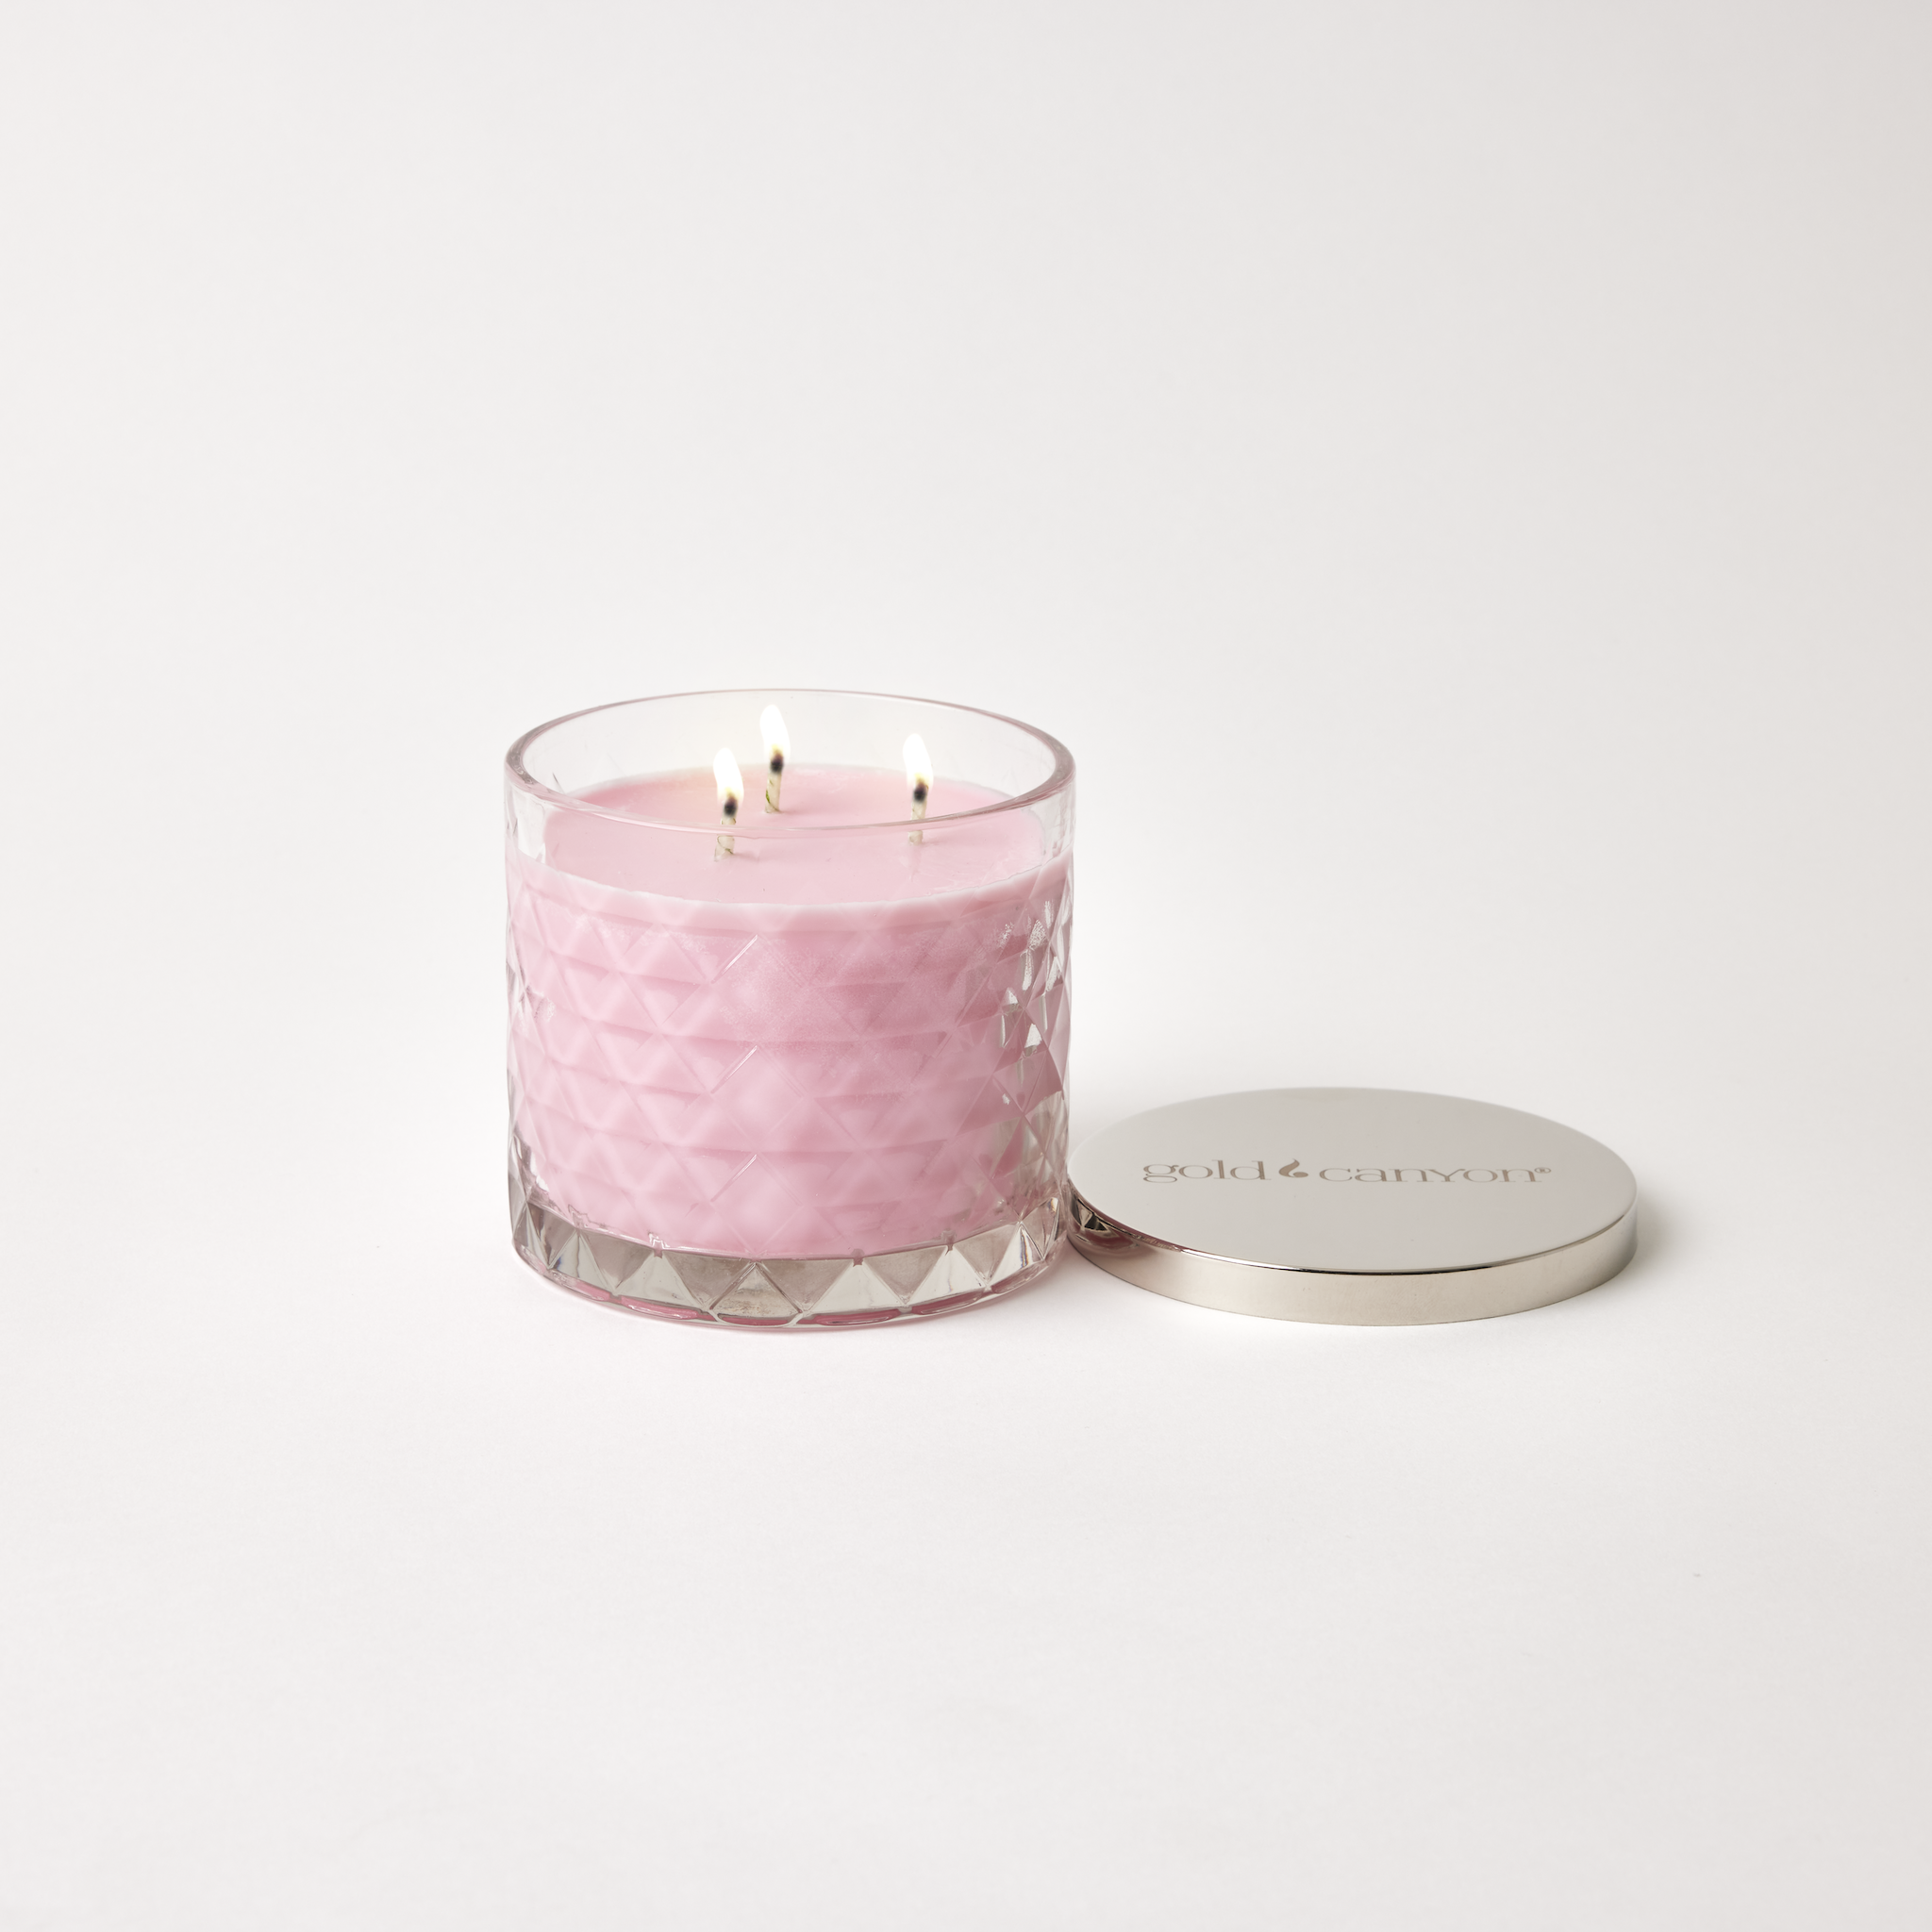  Gold Canyon Sweet Pea Scented Soy Candle